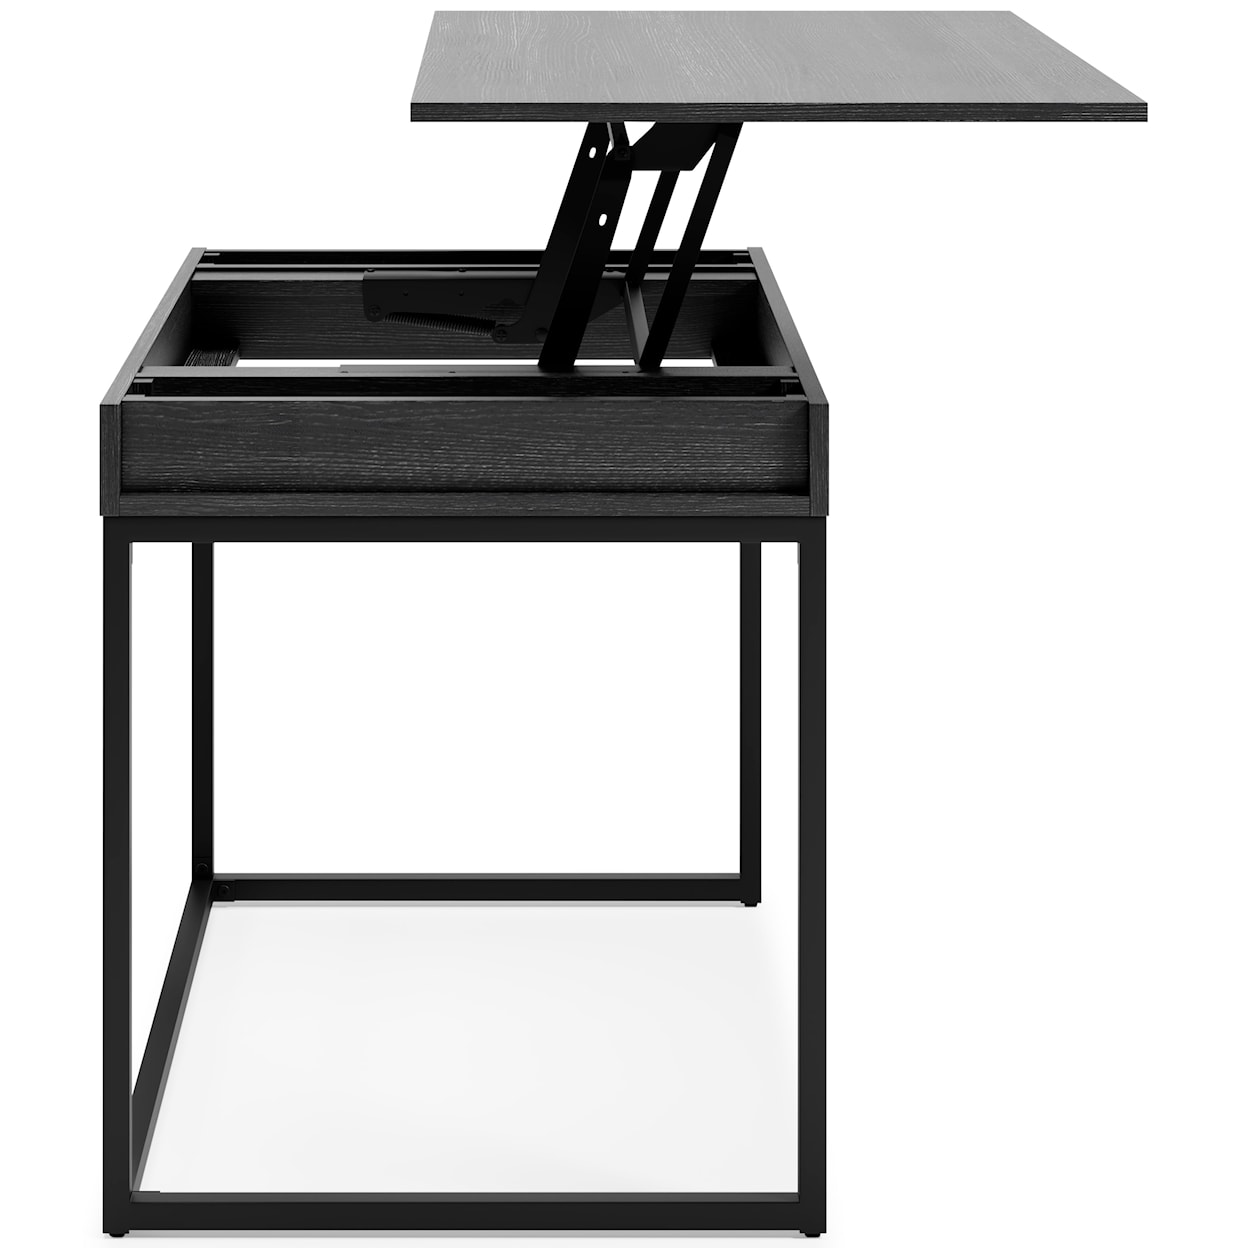 Michael Alan Select Yarlow 36" Home Office Lift-Top Desk